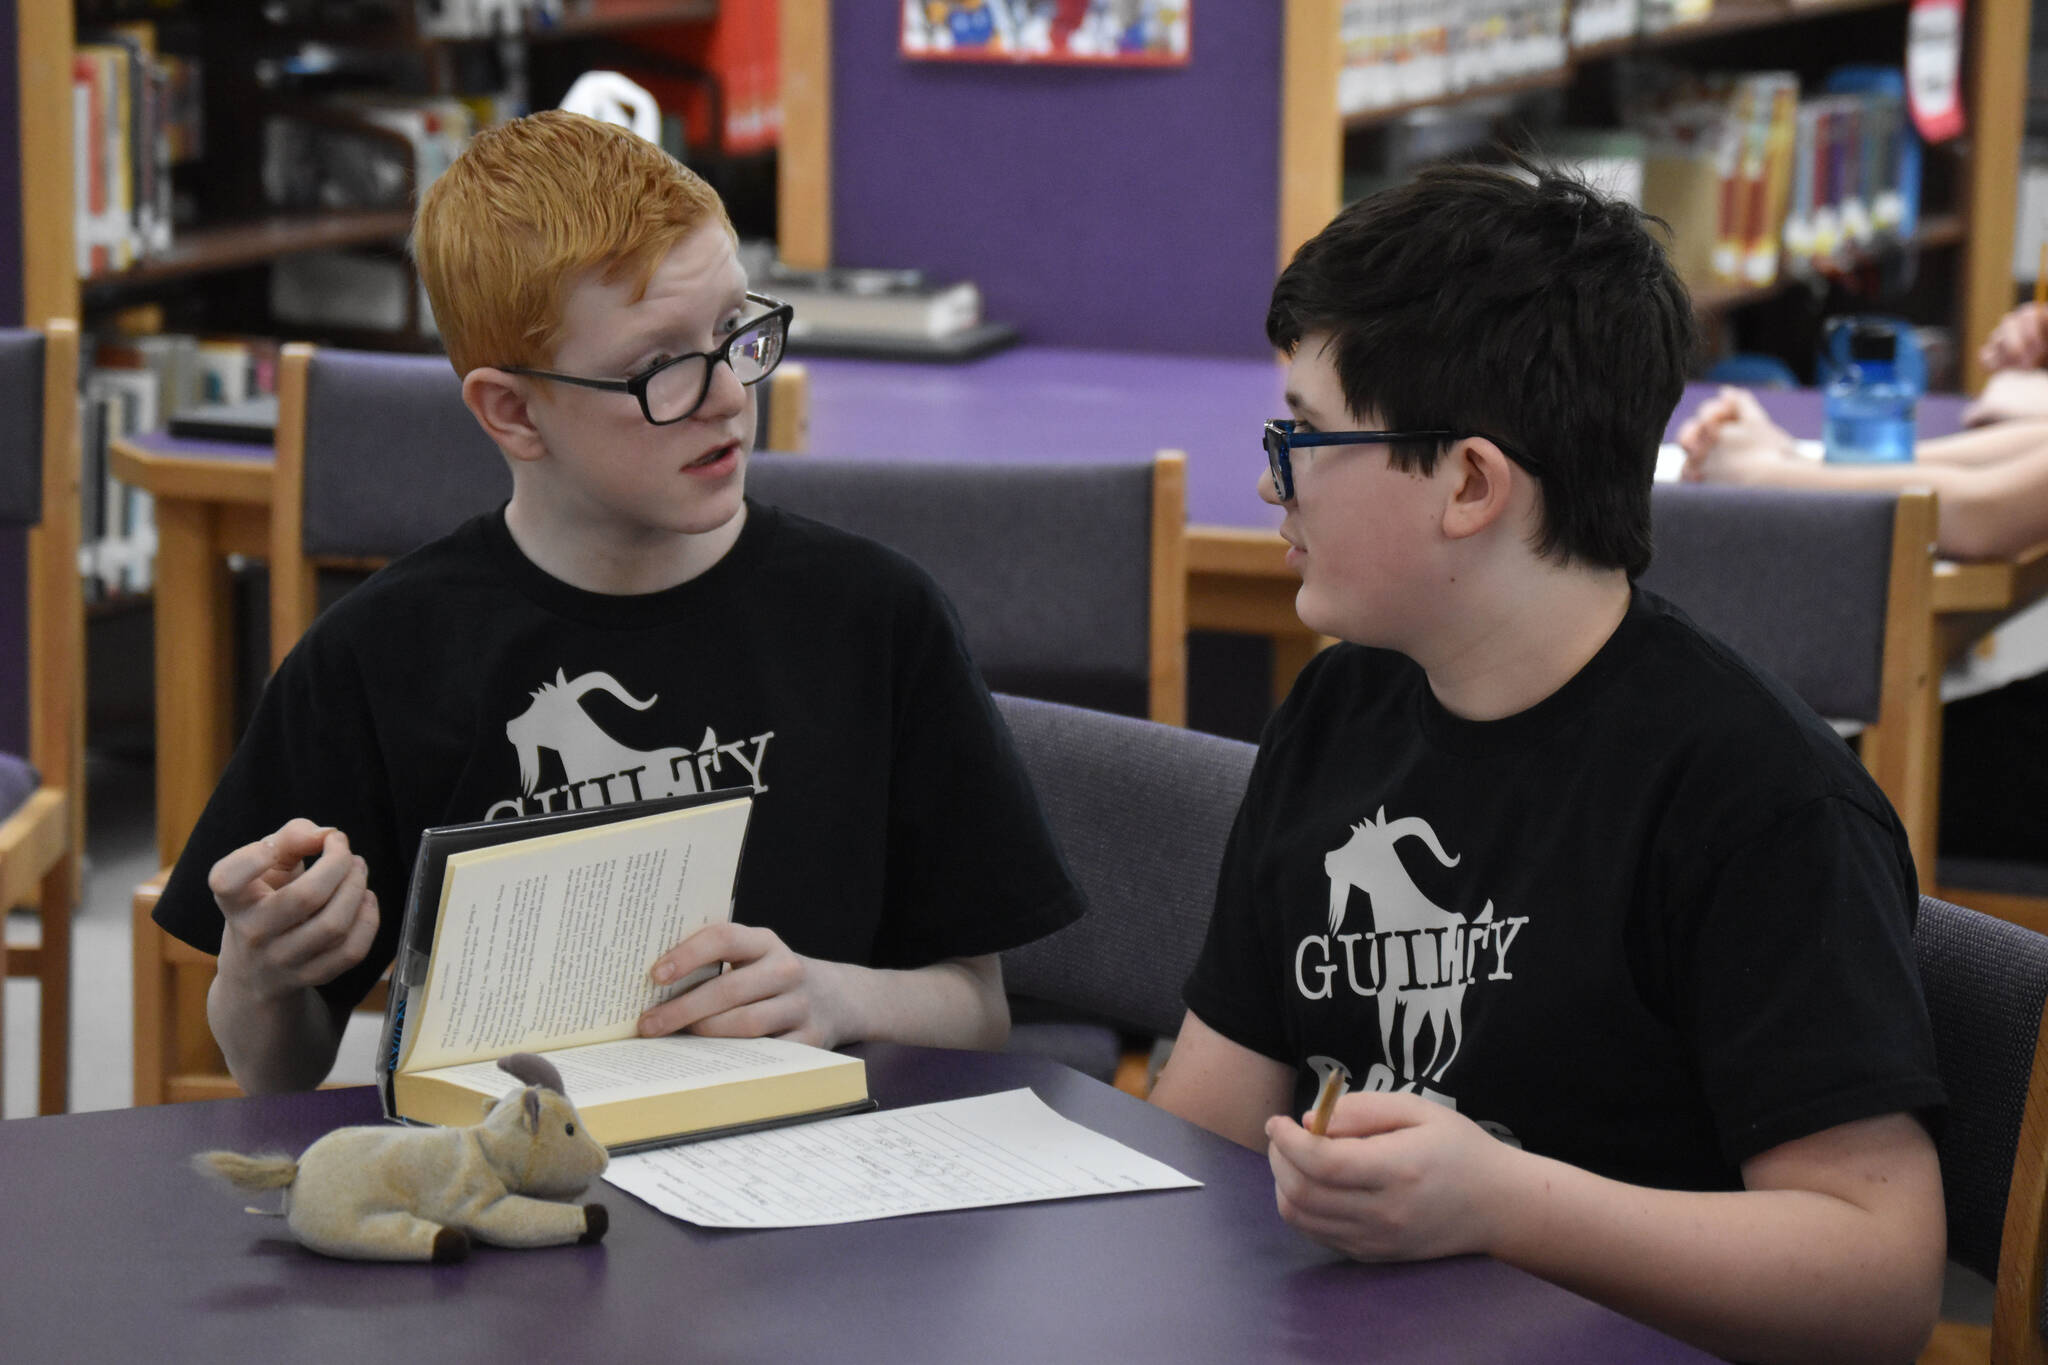 Alan Hack and Oscar Marcou discuss the evidence that they will present to support a challenge issued during Kenai Peninsula Borough School District Middle School Battle of the Books competition on Thursday, Feb. 9, 2023, at Kenai Middle School in Kenai, Alaska. The challenge would ultimately be declared successful. (Jake Dye/Peninsula Clarion)